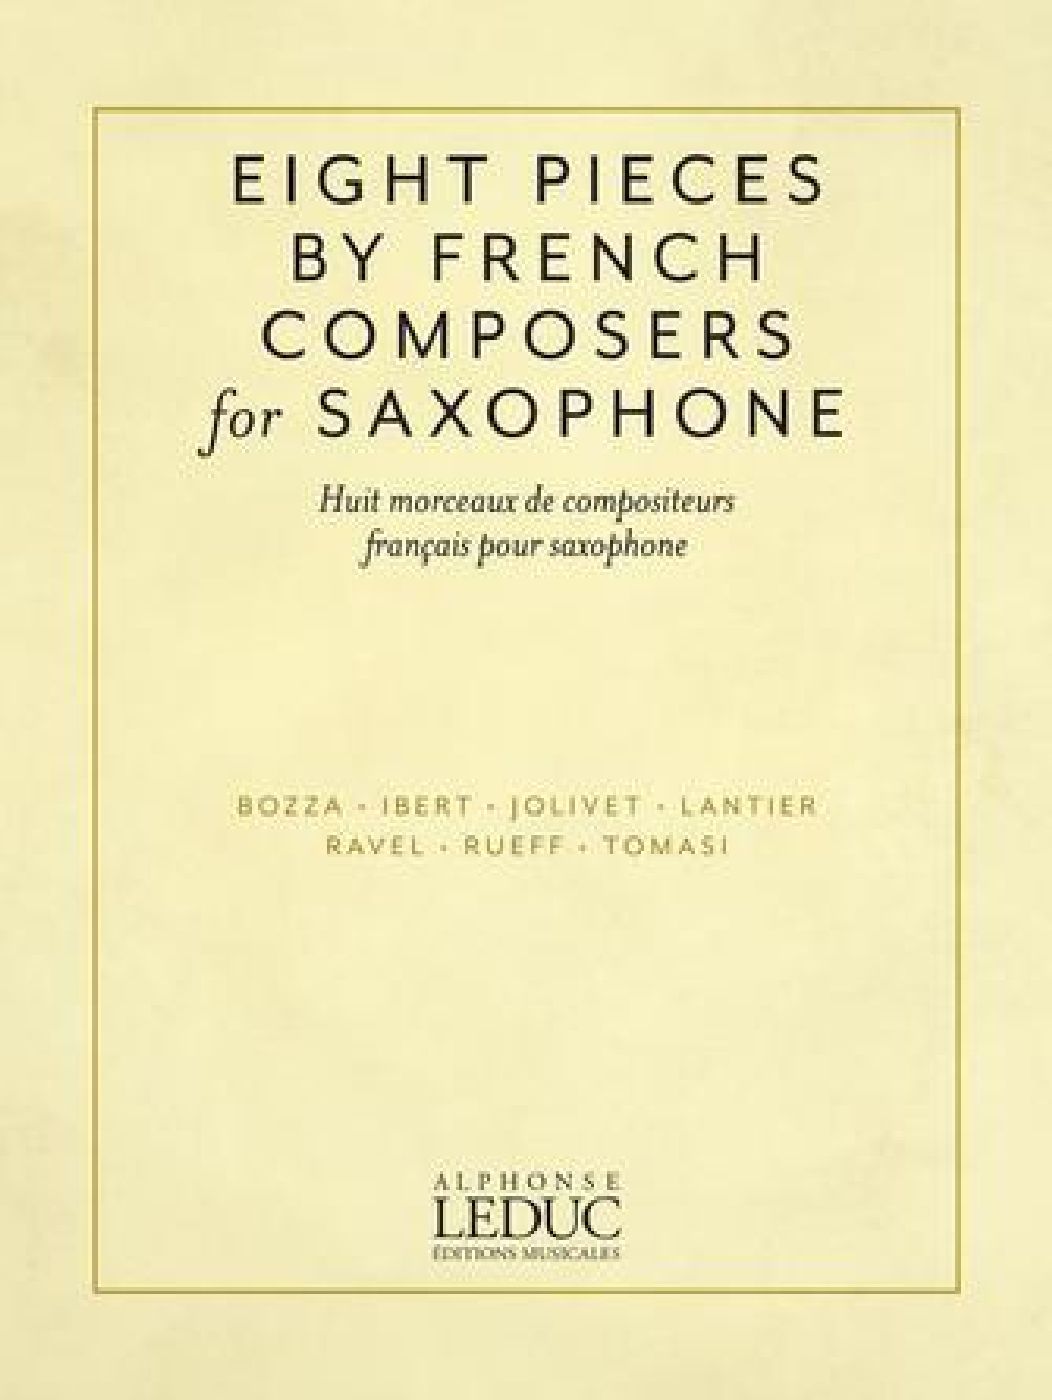 LEDUC EIGHT SAXOPHONE PIECES BY FRENCH COMPOSERS - SAX ALTO ET PIANO